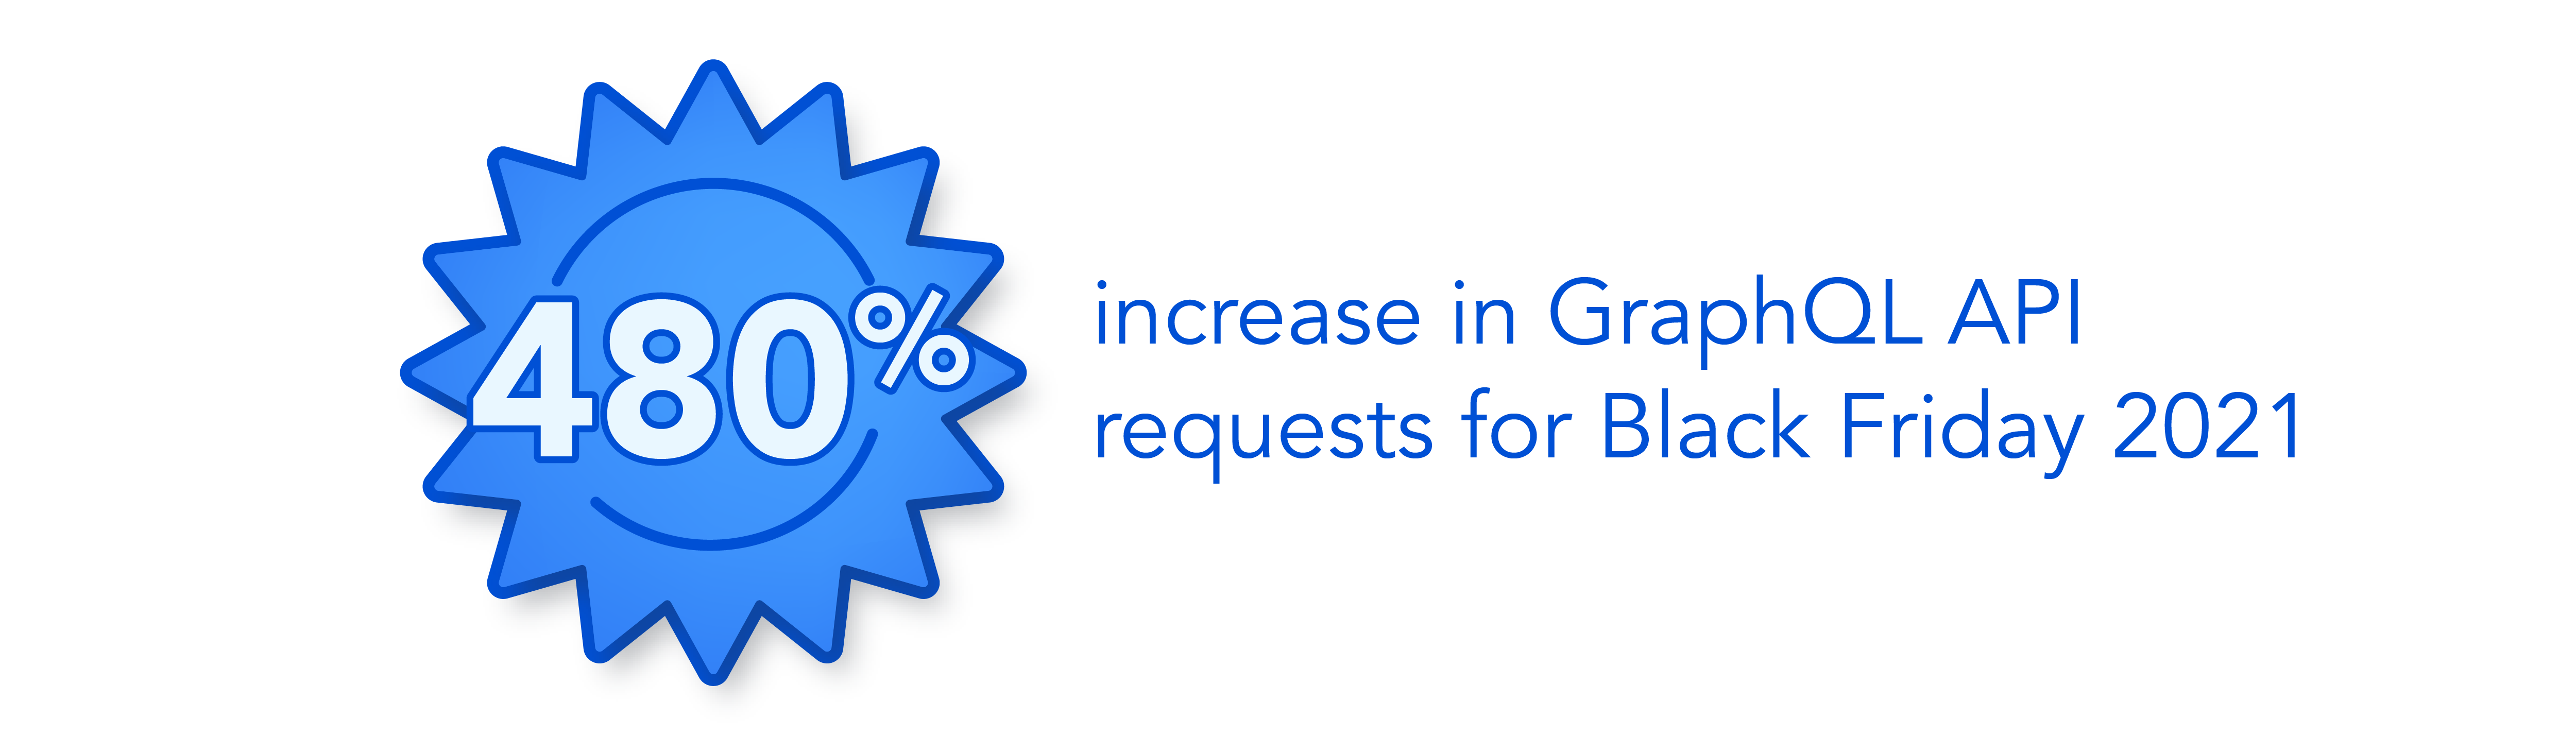 480% increase in GraphQL API requests for Black Friday 2021